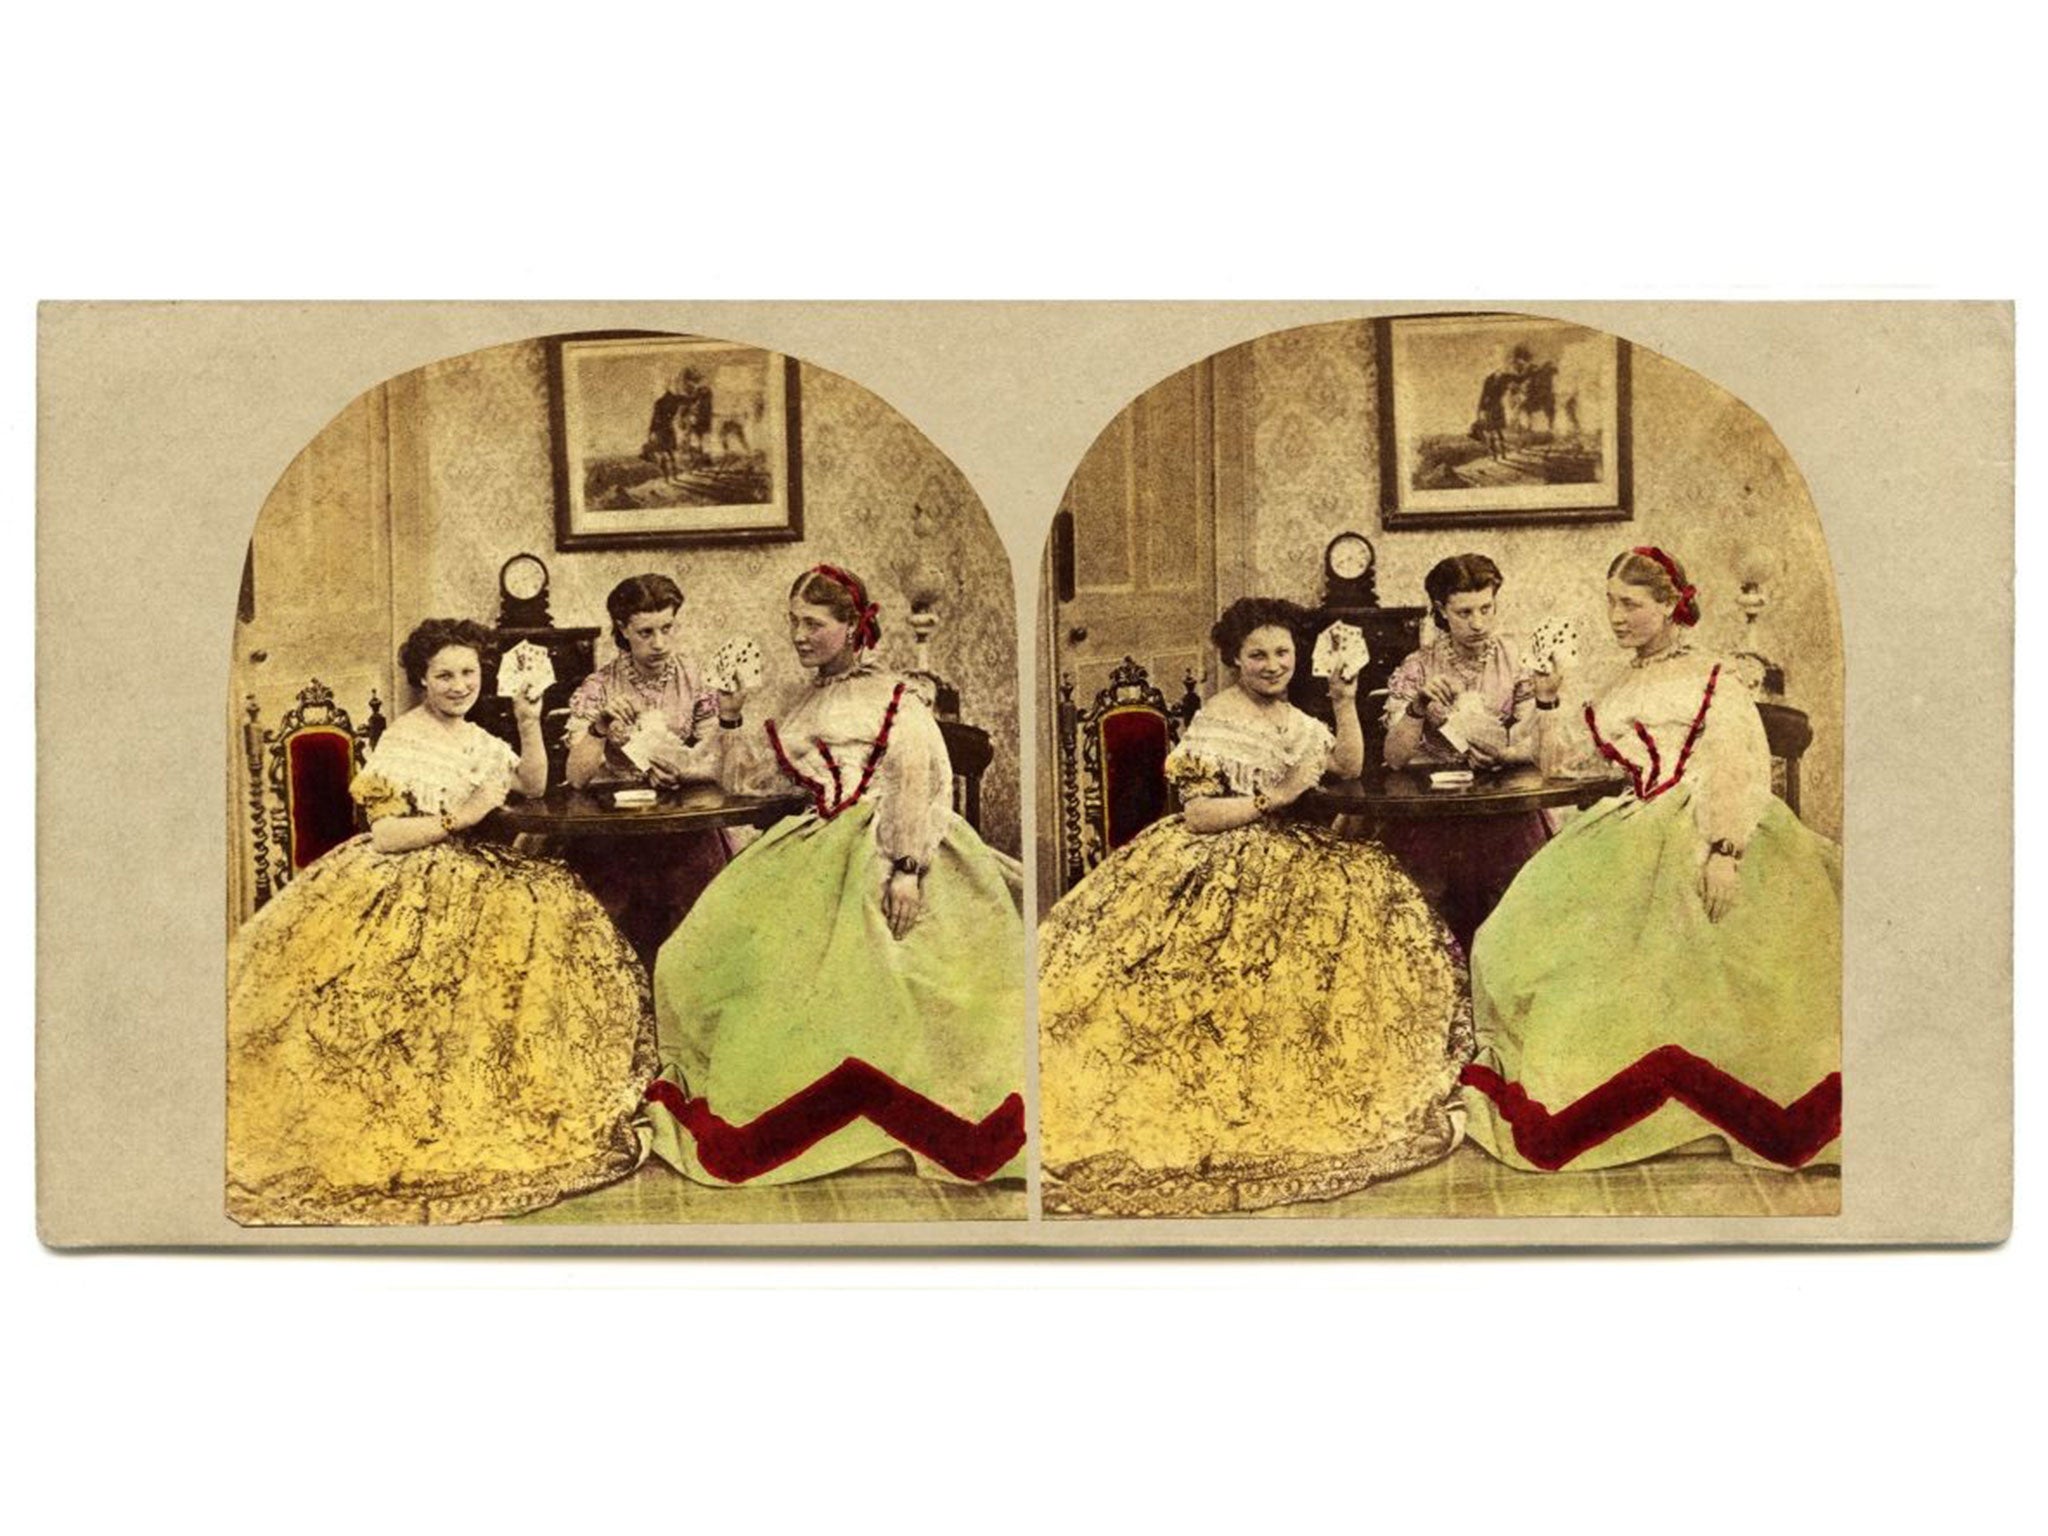 Michael Burr, Hearts are Trumps 1866. Photograph, hand coloured albumen prints on stereo card